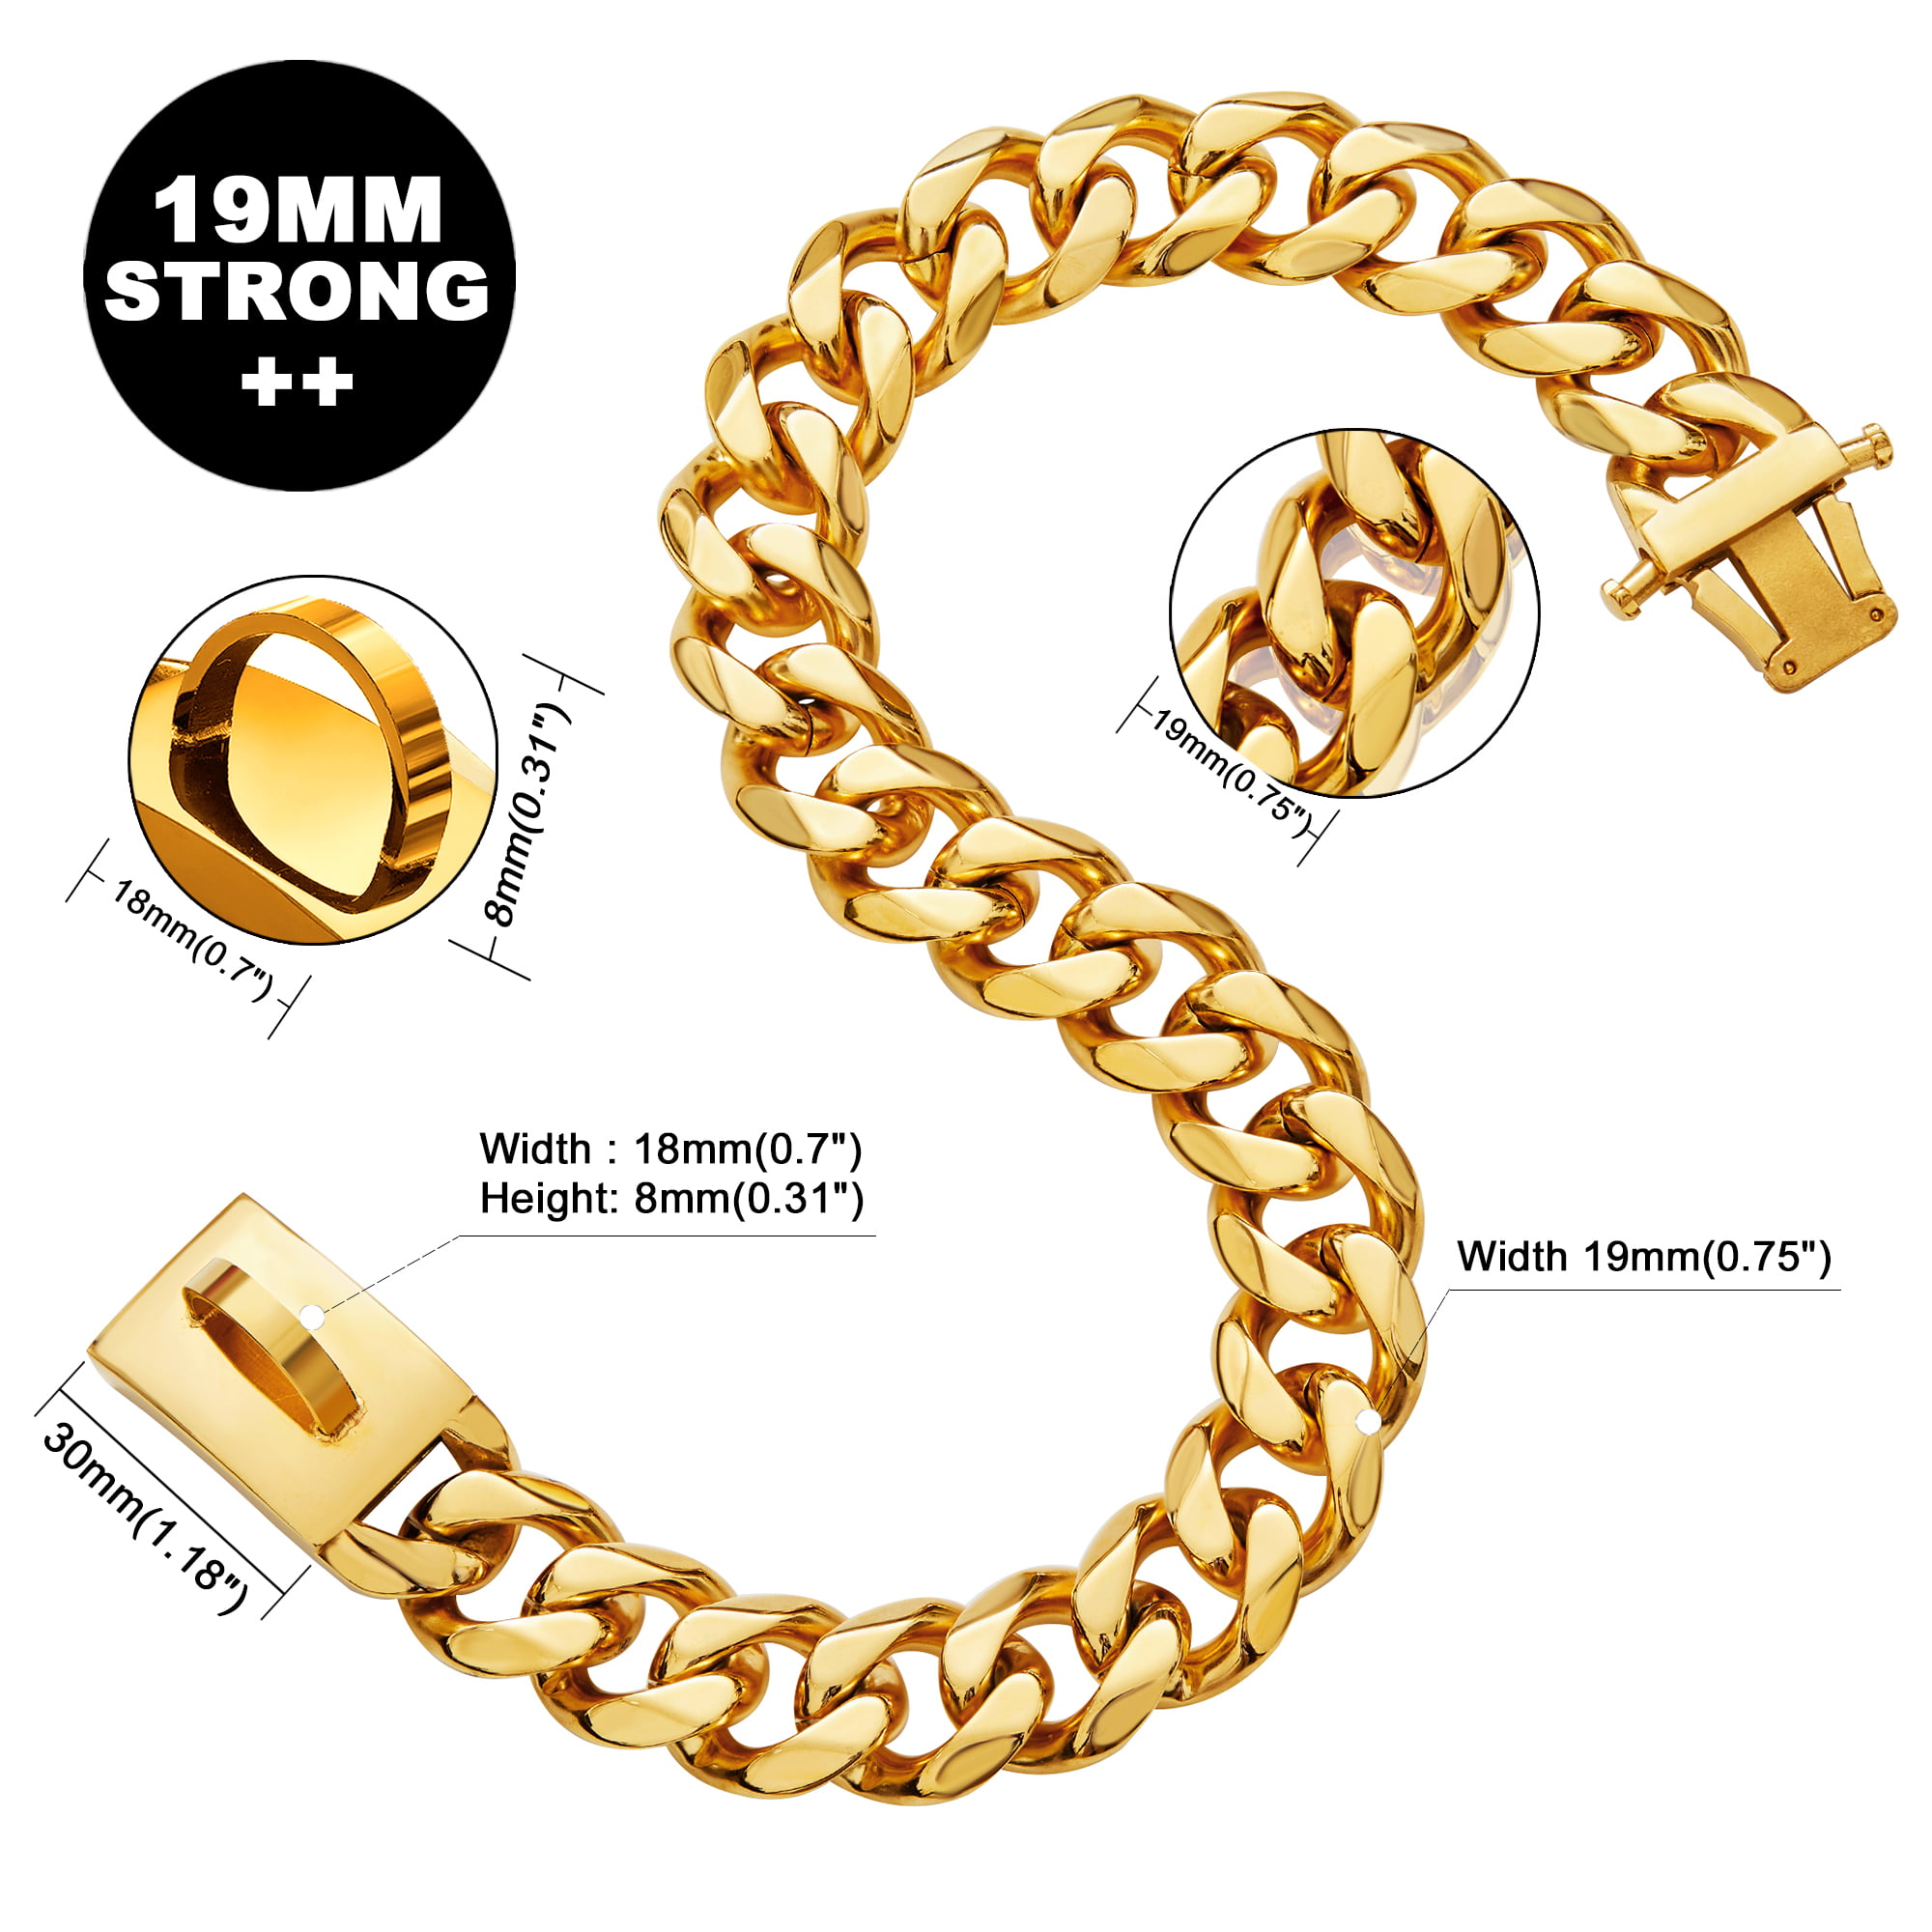 18K Miami Cuban Link Chain 19MM Strong Heavy Duty Chew Proof Walking Collar for Small Medium Large Dogs BMusdog Gold Dog Chain Collar Metal Chain Collar with Design Secure Buckle 